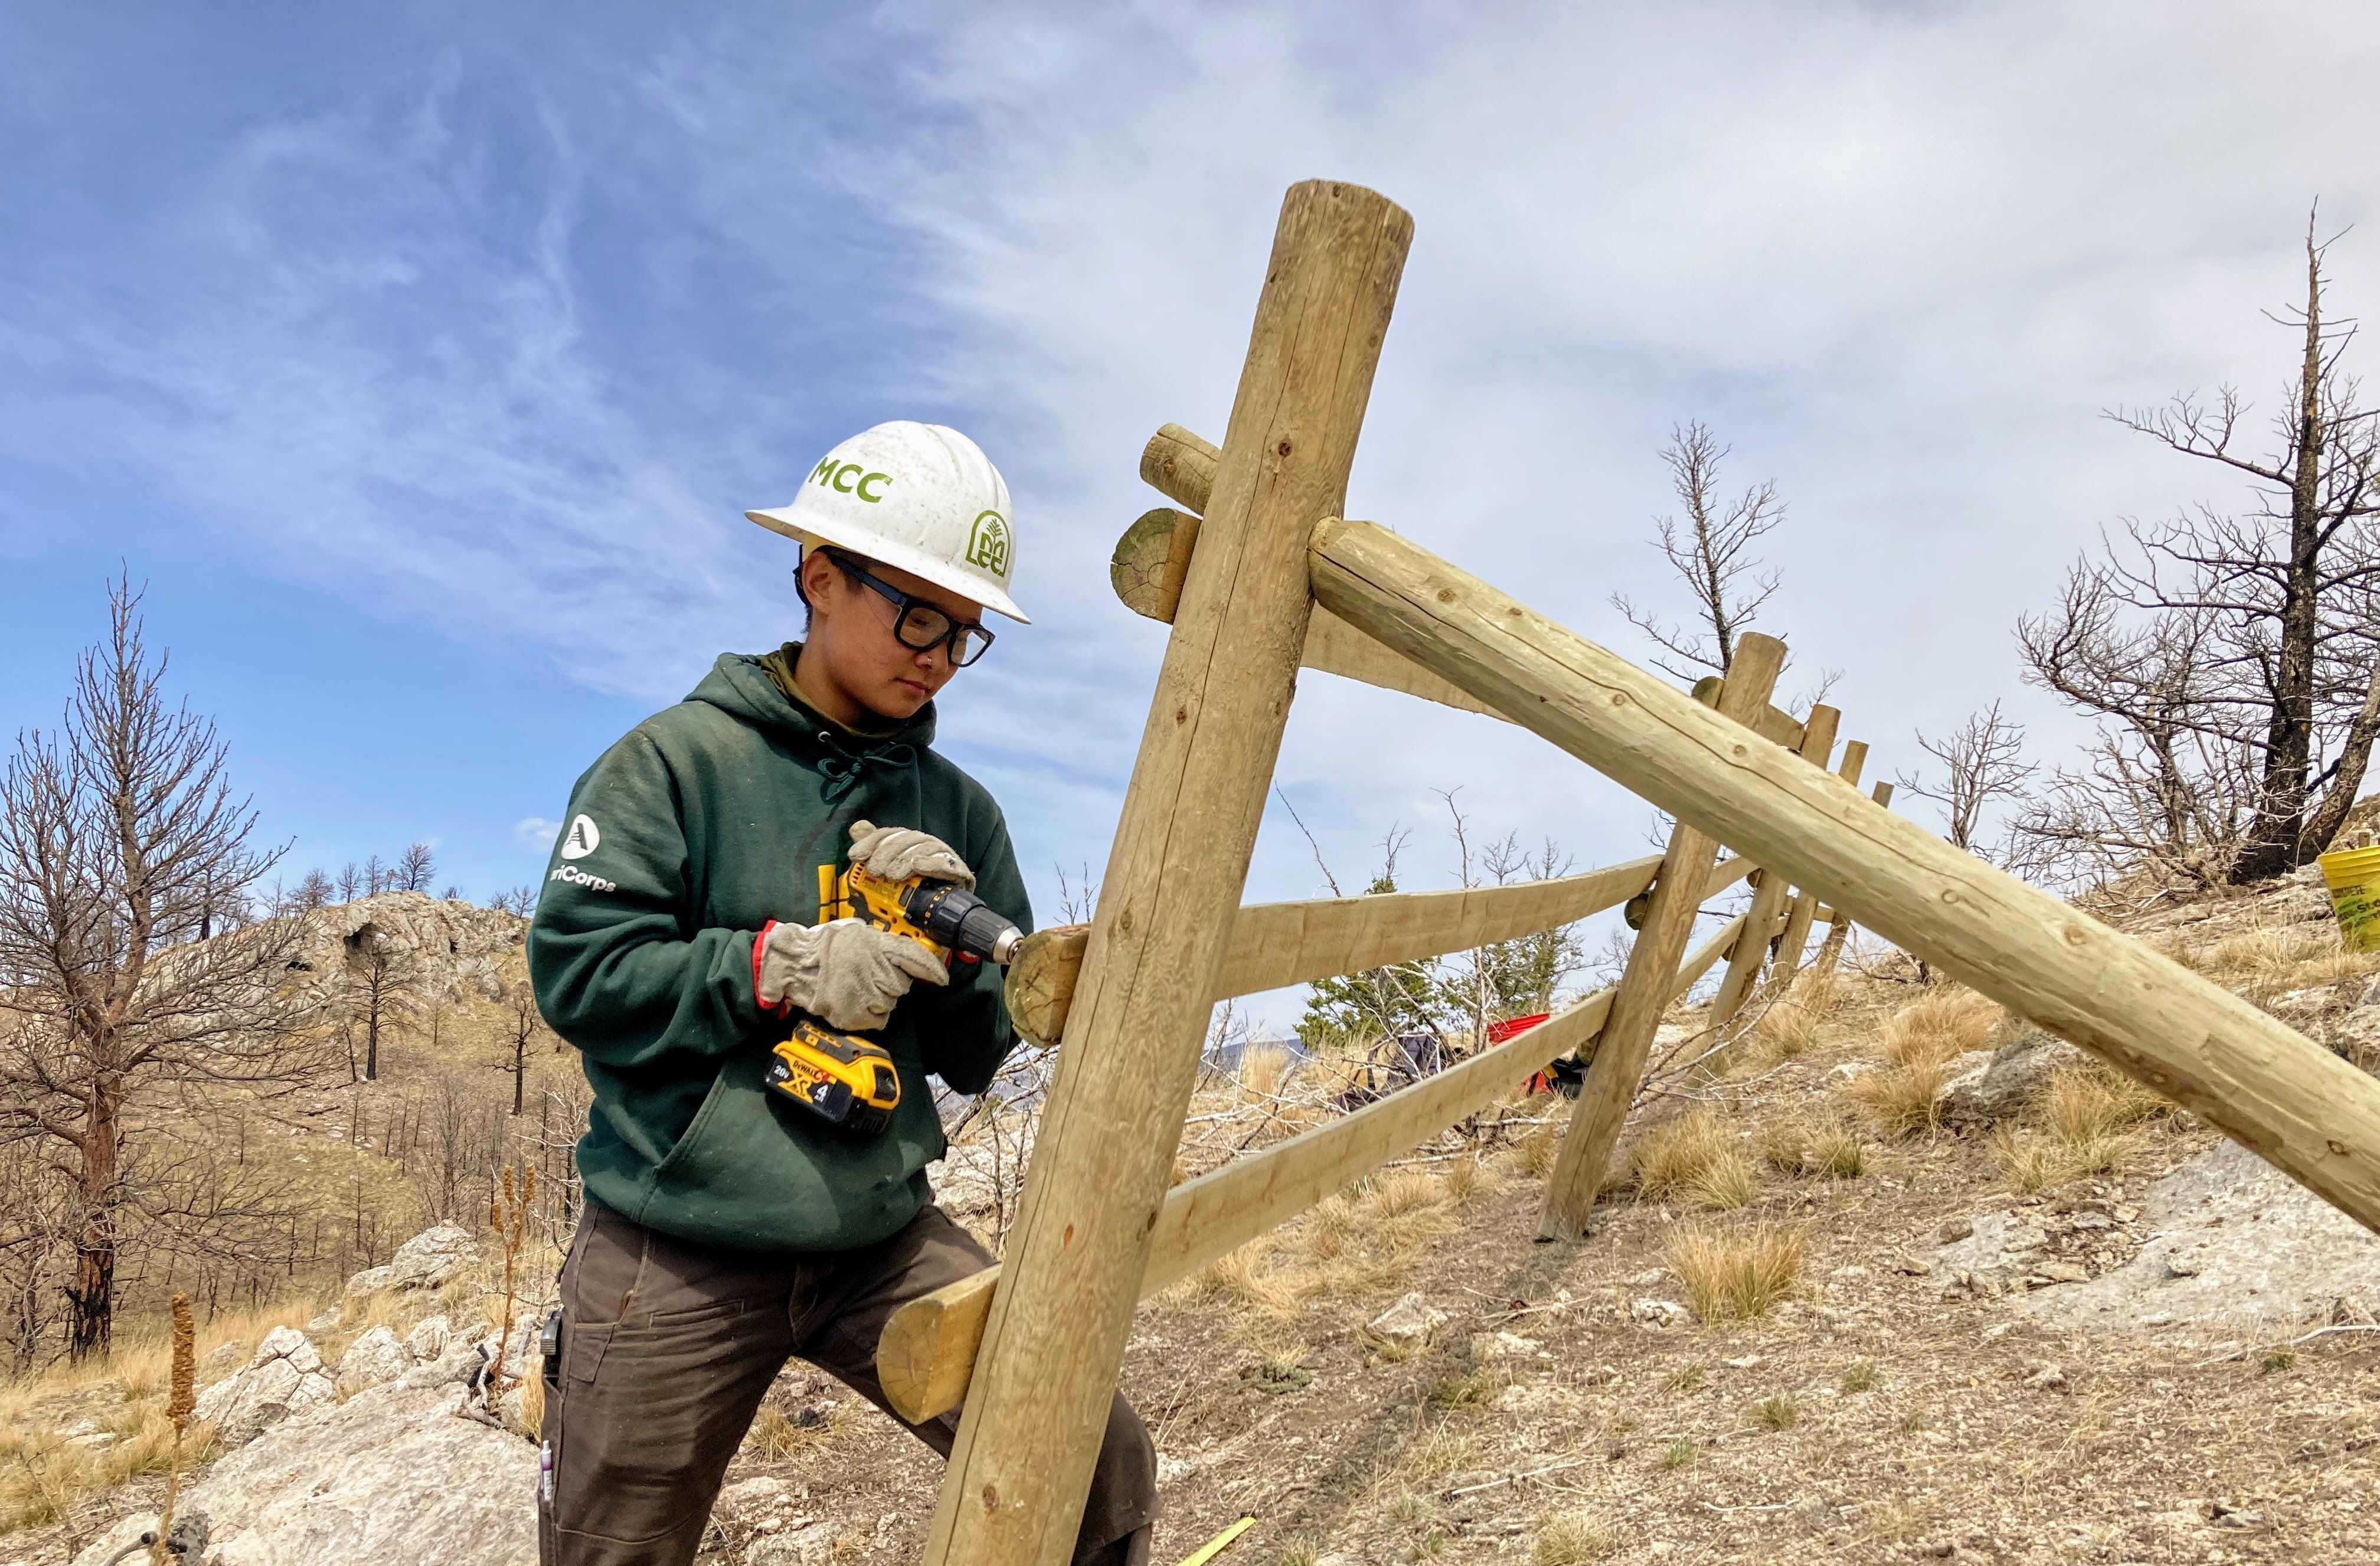 [Image description: A MCC member uses a hand drill to build a fence, wearing their MCC sweatshirt and hard hat.]